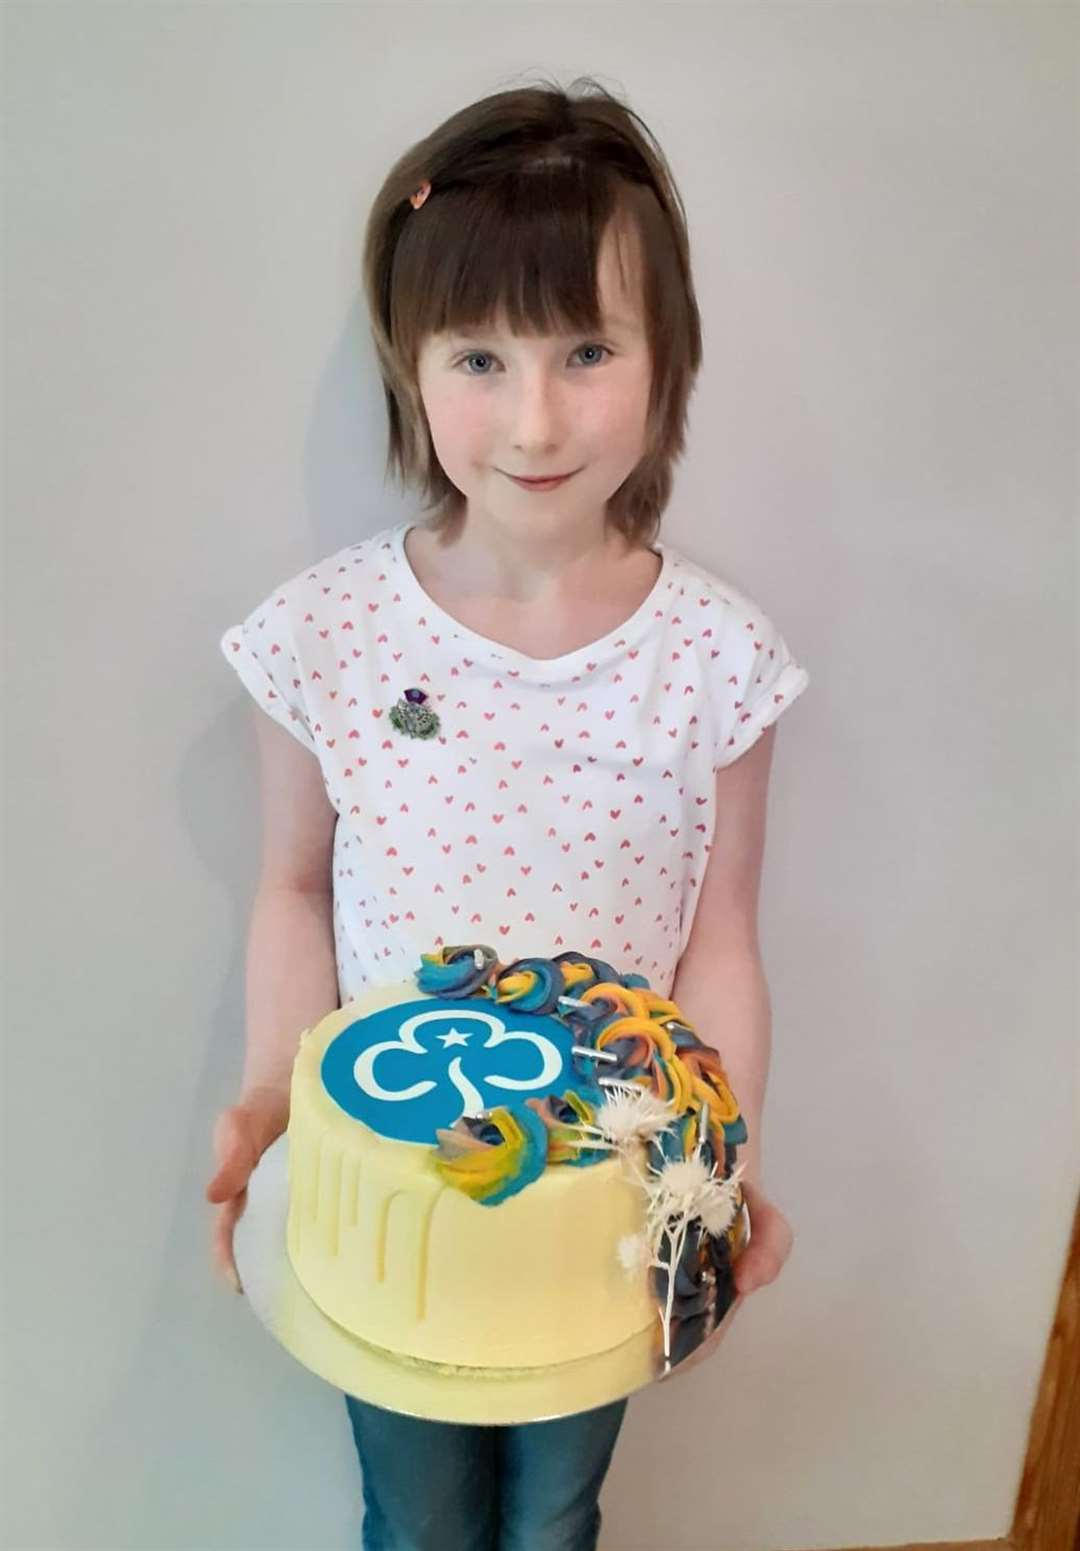 Imogen Gunn, wearing her award, holding a cake she received from Girlguiding Caithness to help her and her family celebrate.